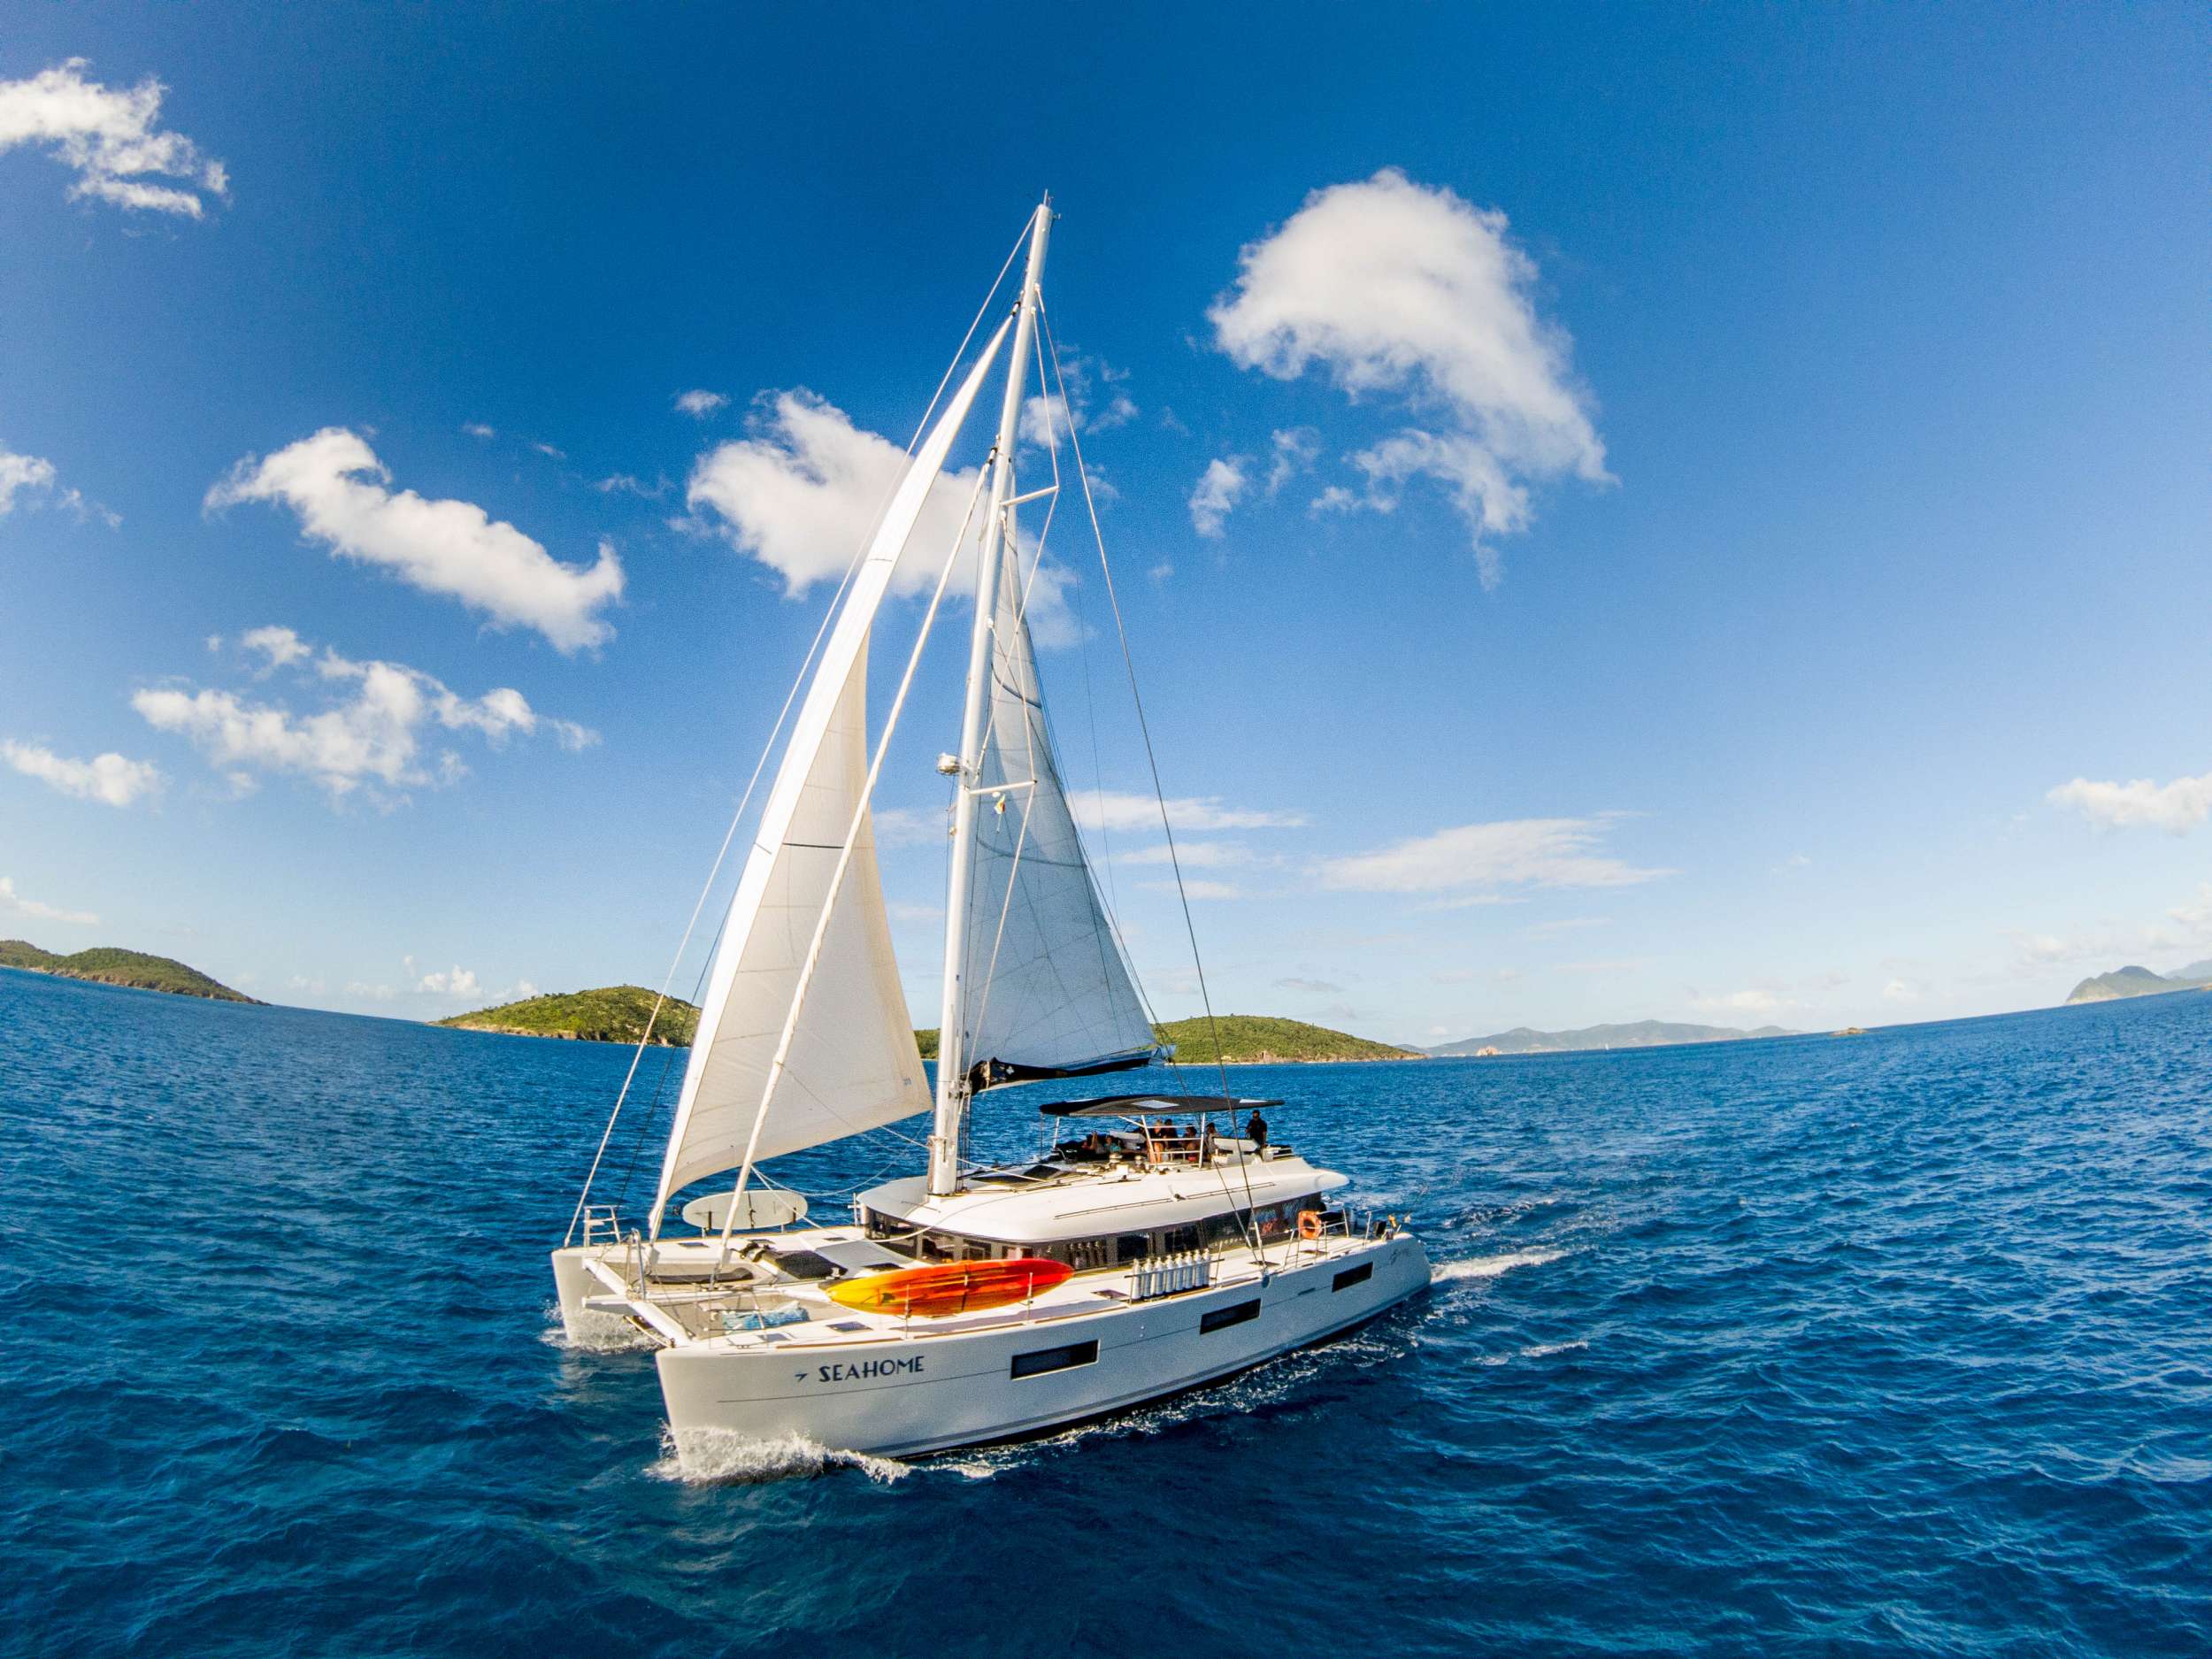 seahome - Yacht Charter Marigot & Boat hire in Caribbean 1